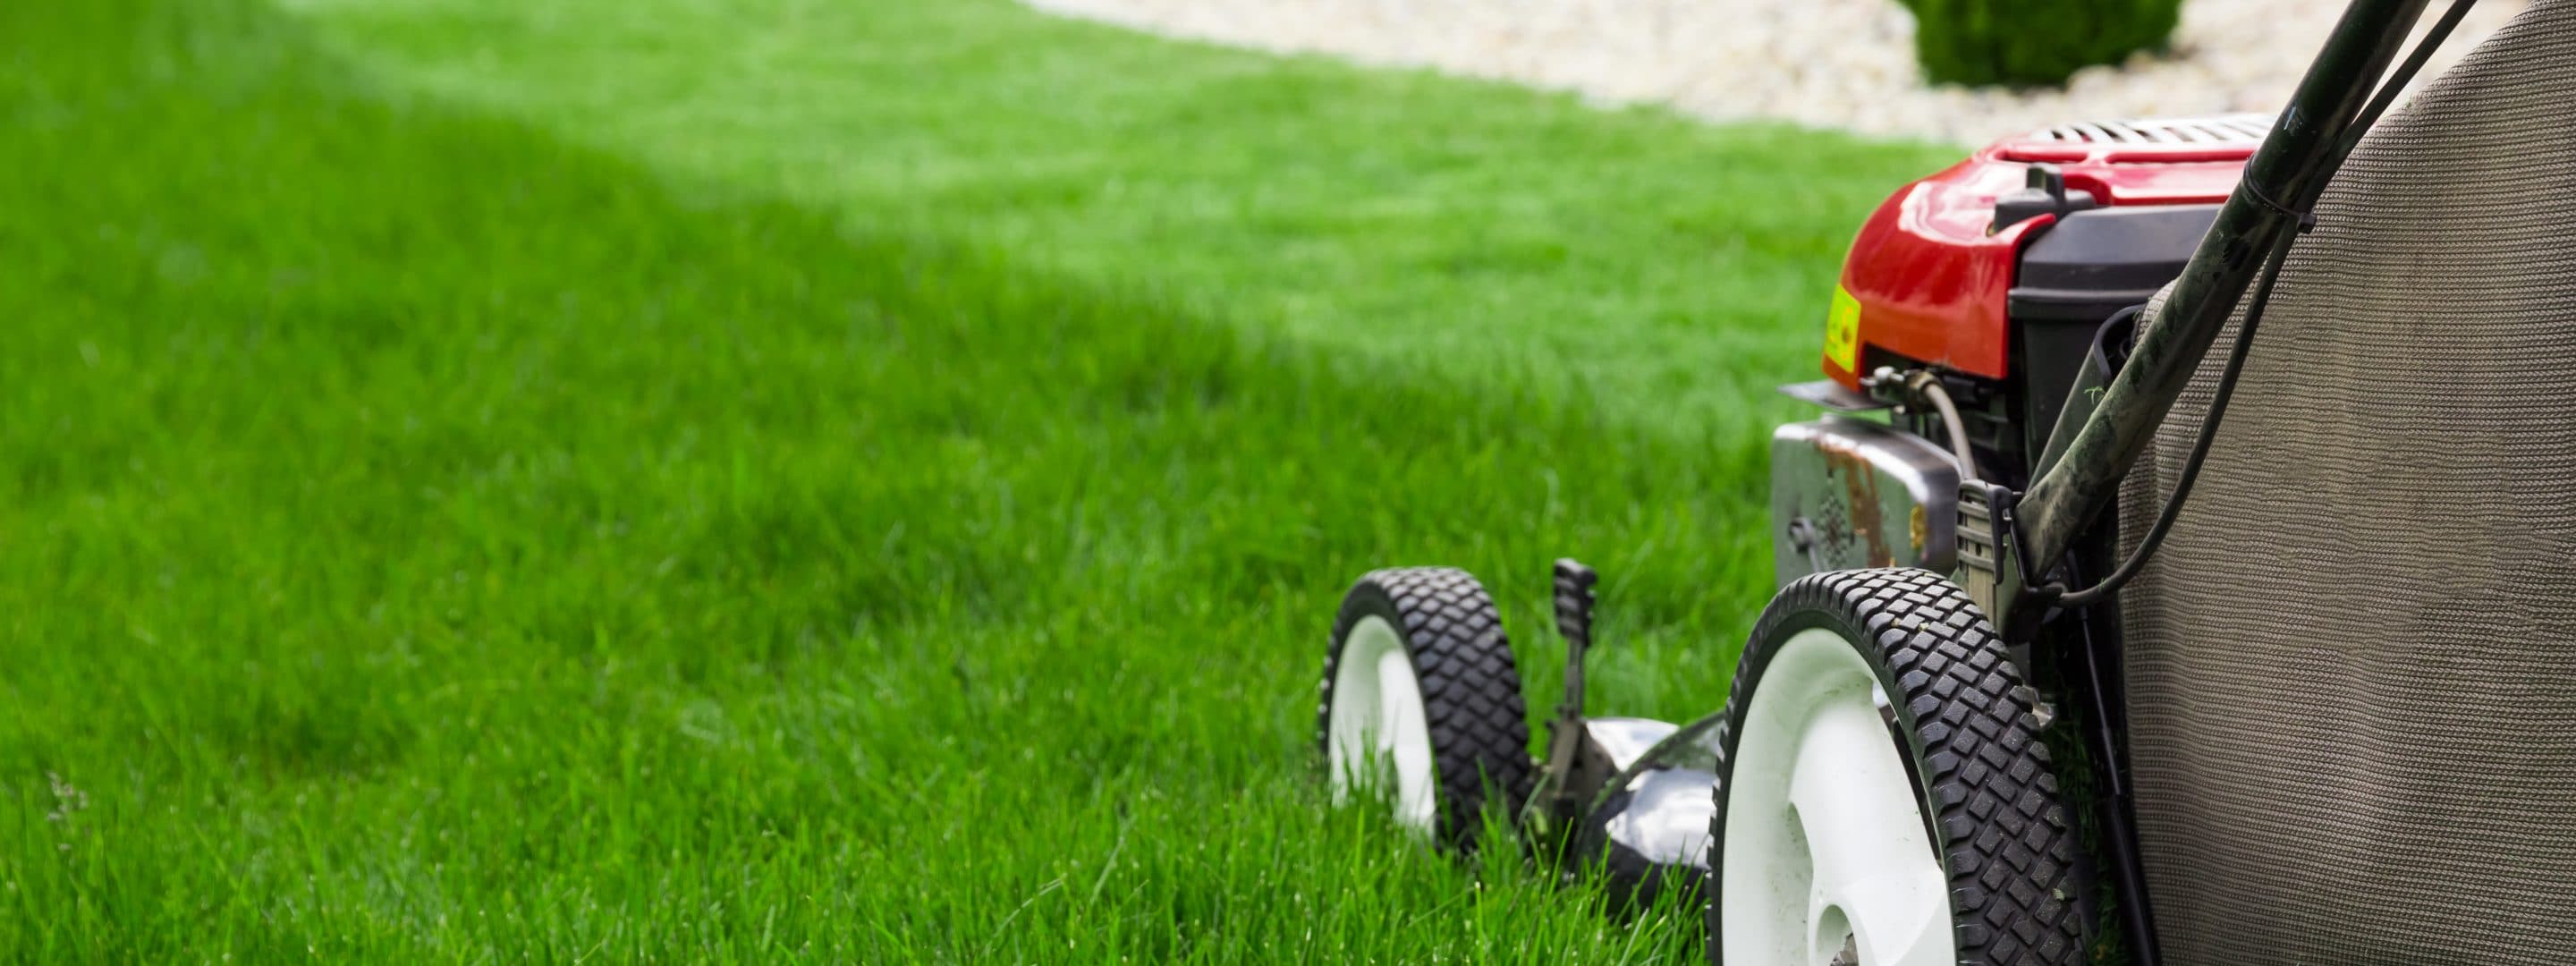 spring lawn care - mowing practices